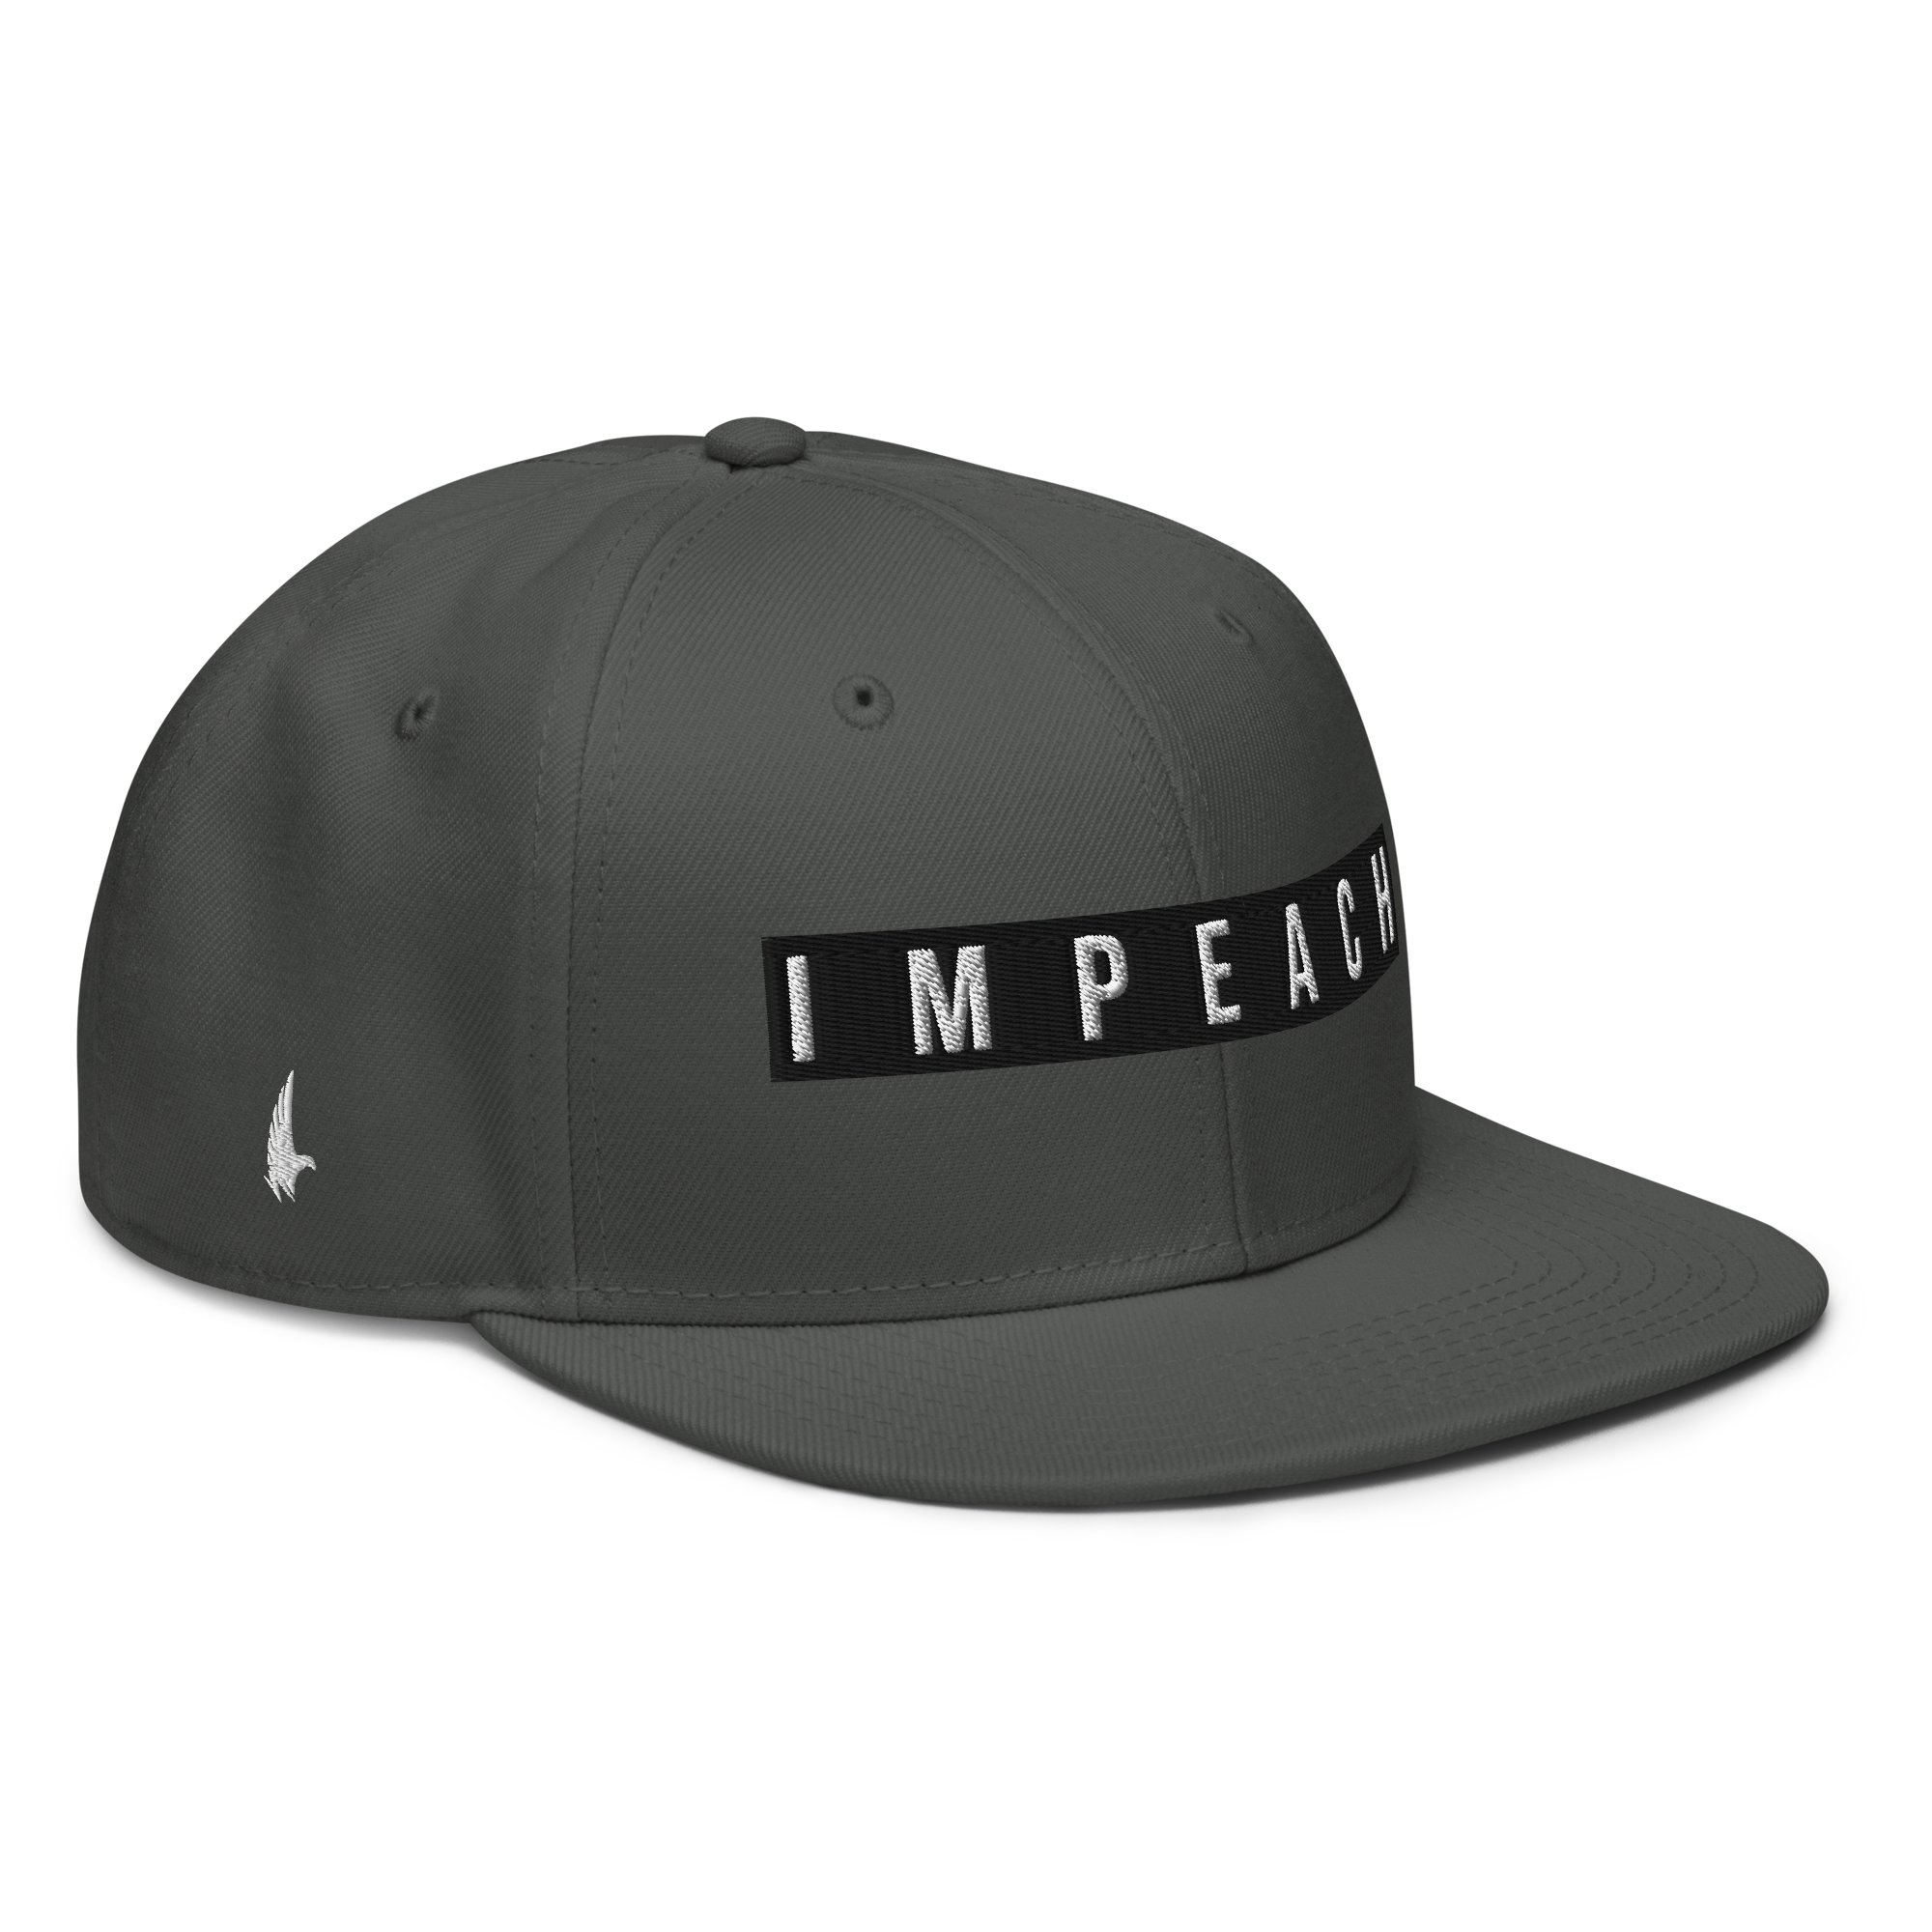 Impeach Snapback Hat Charcoal Grey OS - Loyalty Vibes